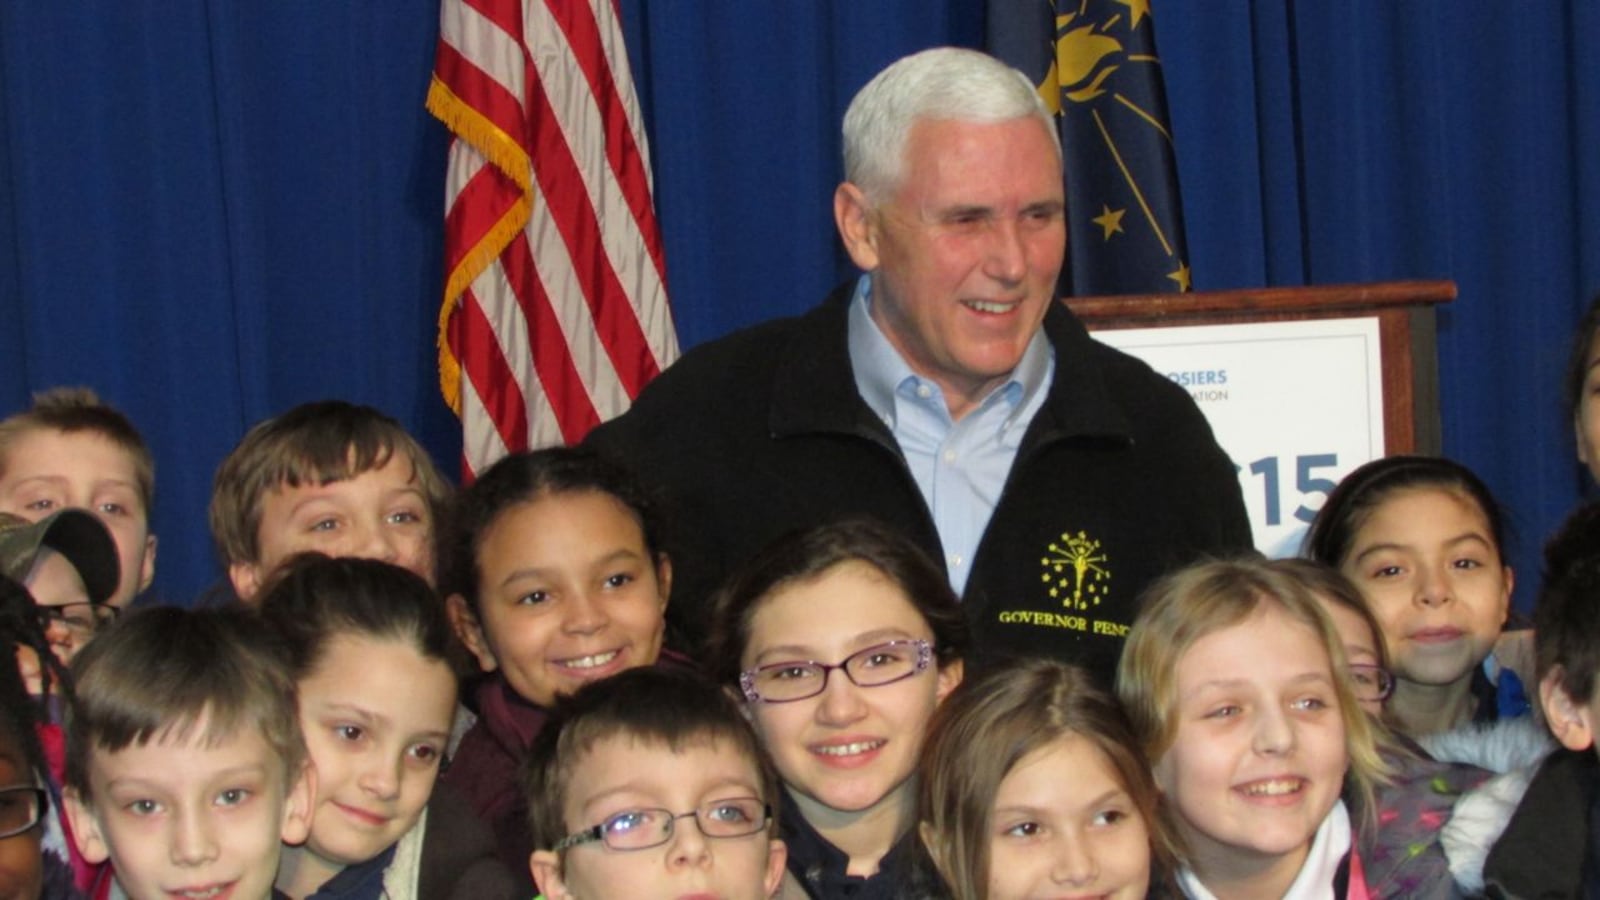 Gov. Mike Pence poses with students from Indianapolis' St Therese Little Flower Catholic School at an annual school choice rally sponsored by the Friedman Foundation in 2015.